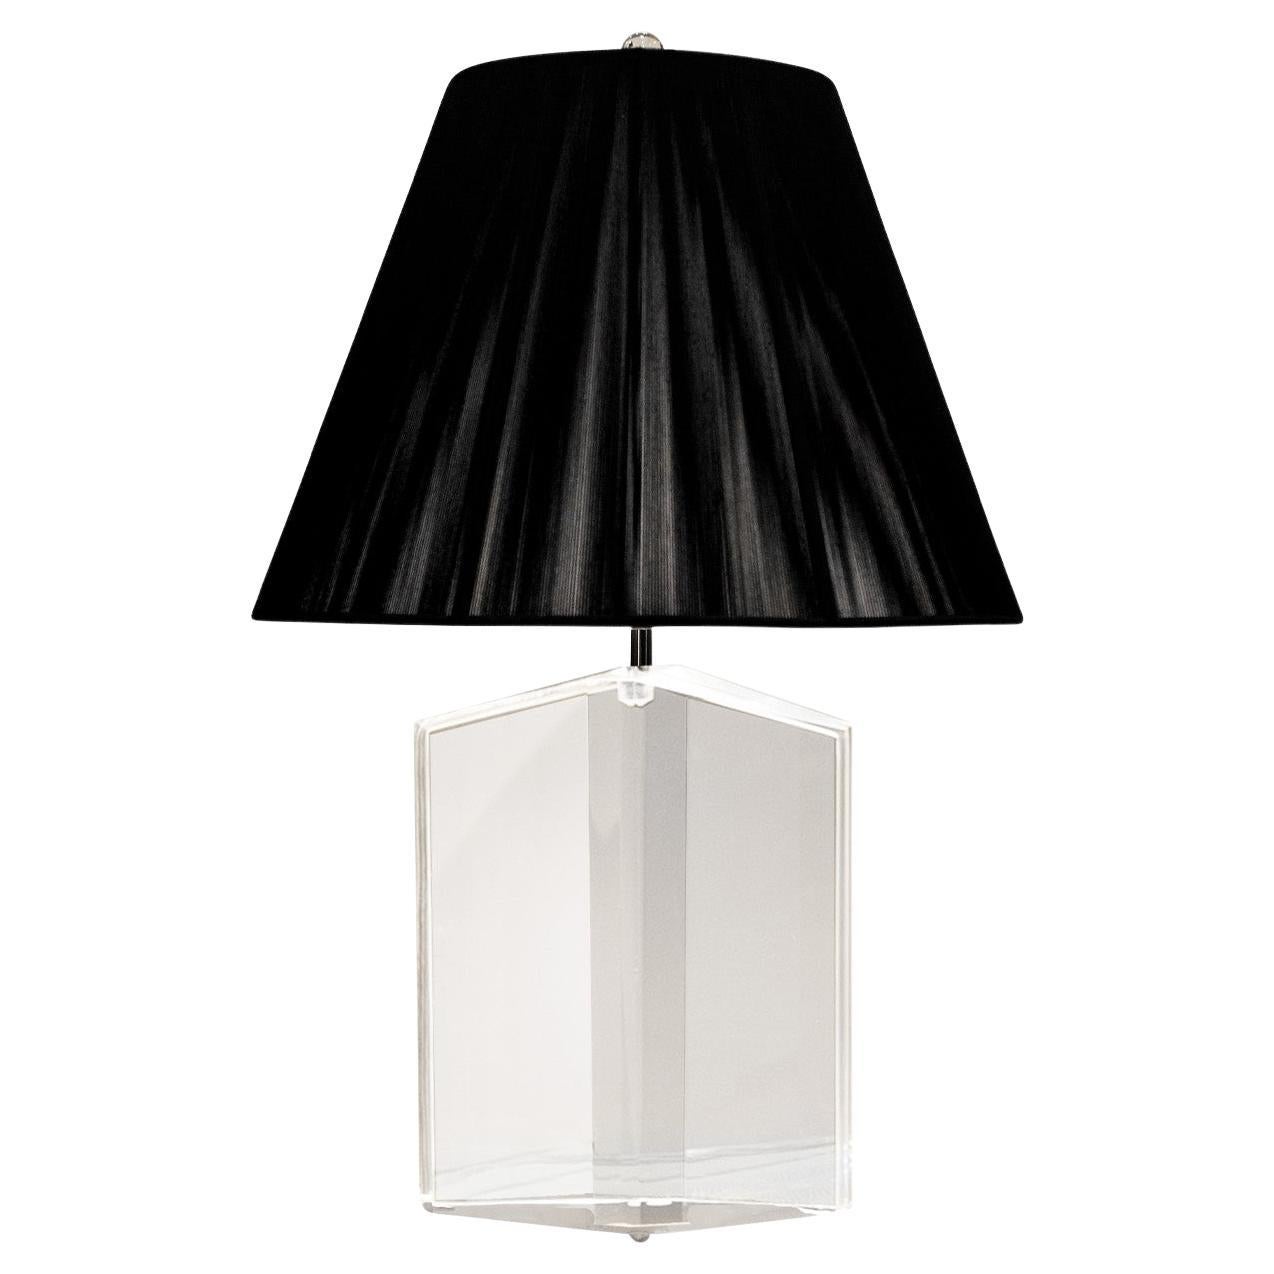 Les Prismatiques Tapering Lucite Table Lamp with Chrome Hardware, 1970s For Sale